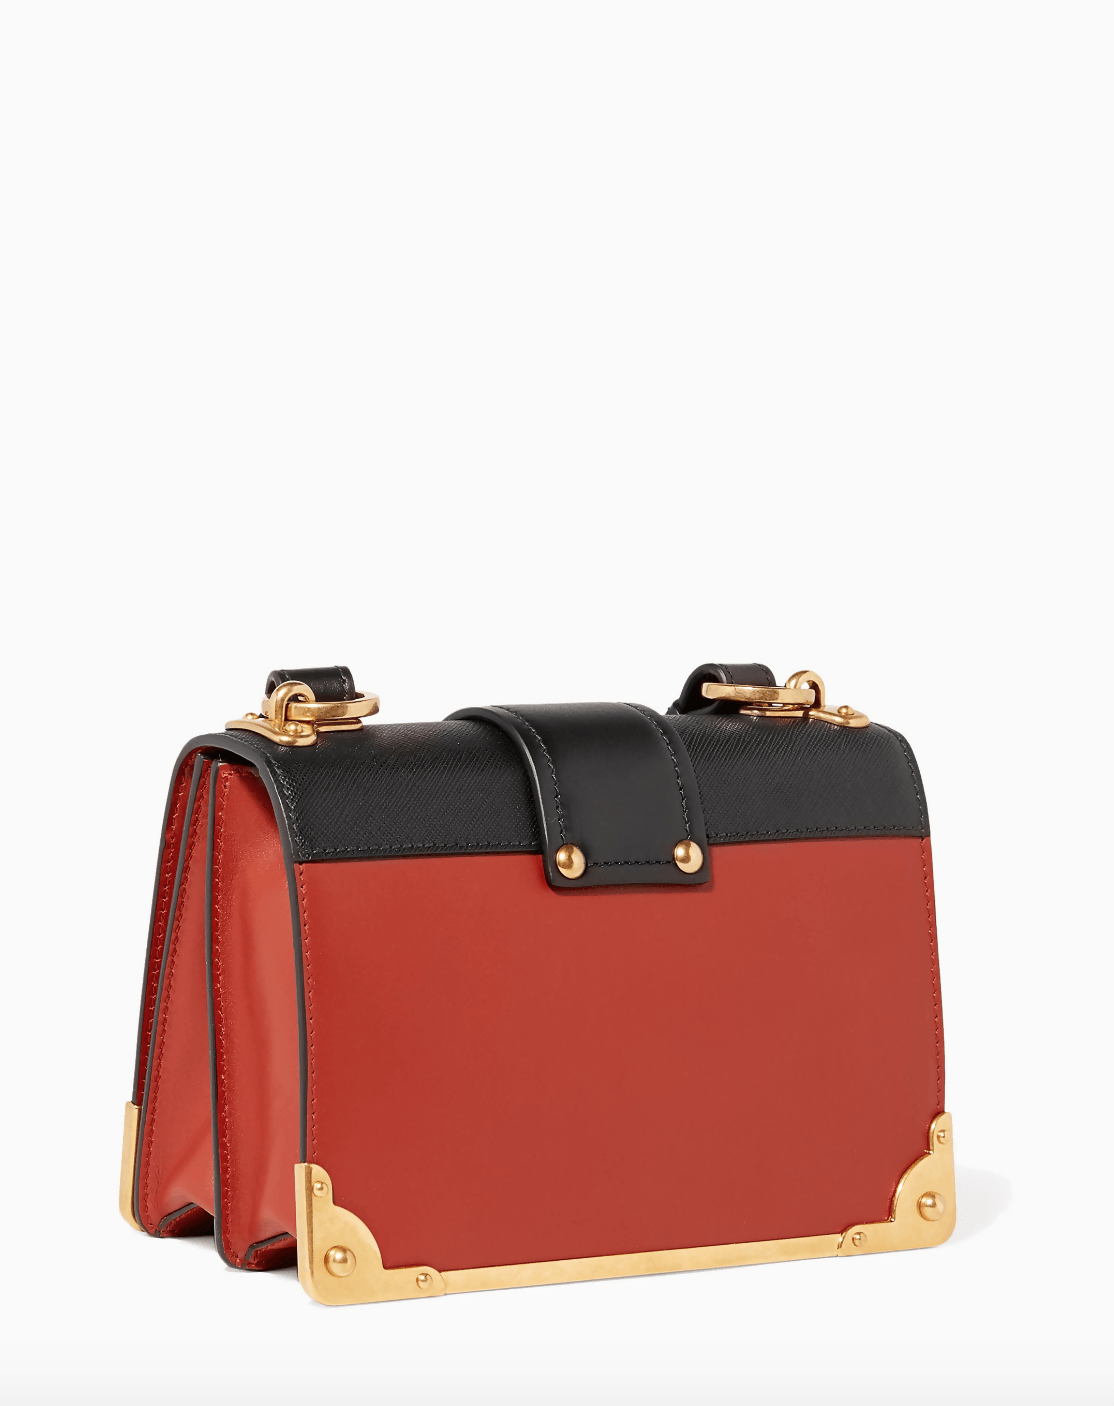 Cahier Leather Cross-Body Bag - Endless